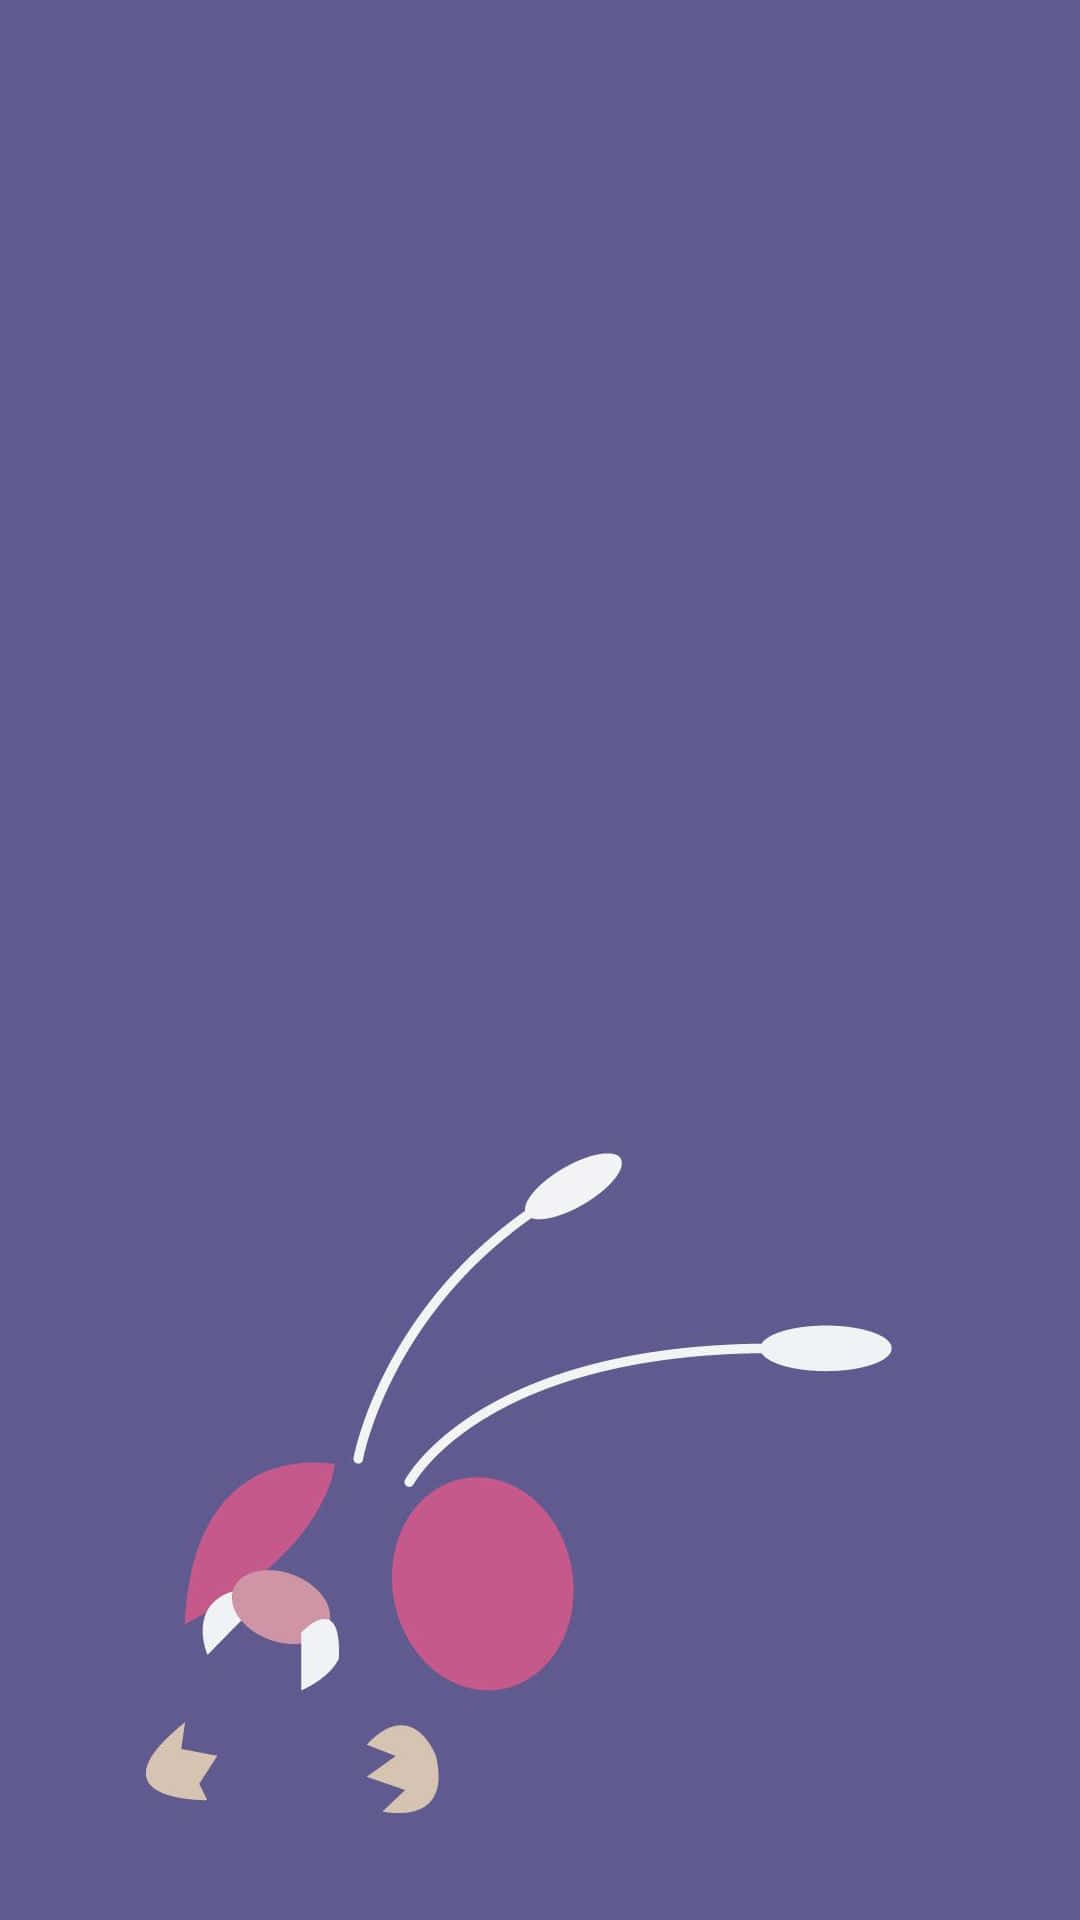 Vibrant Venonat: Catching a Glimpse of Pokemon's Most Colorful Creature in an Abstract Purple Background Wallpaper